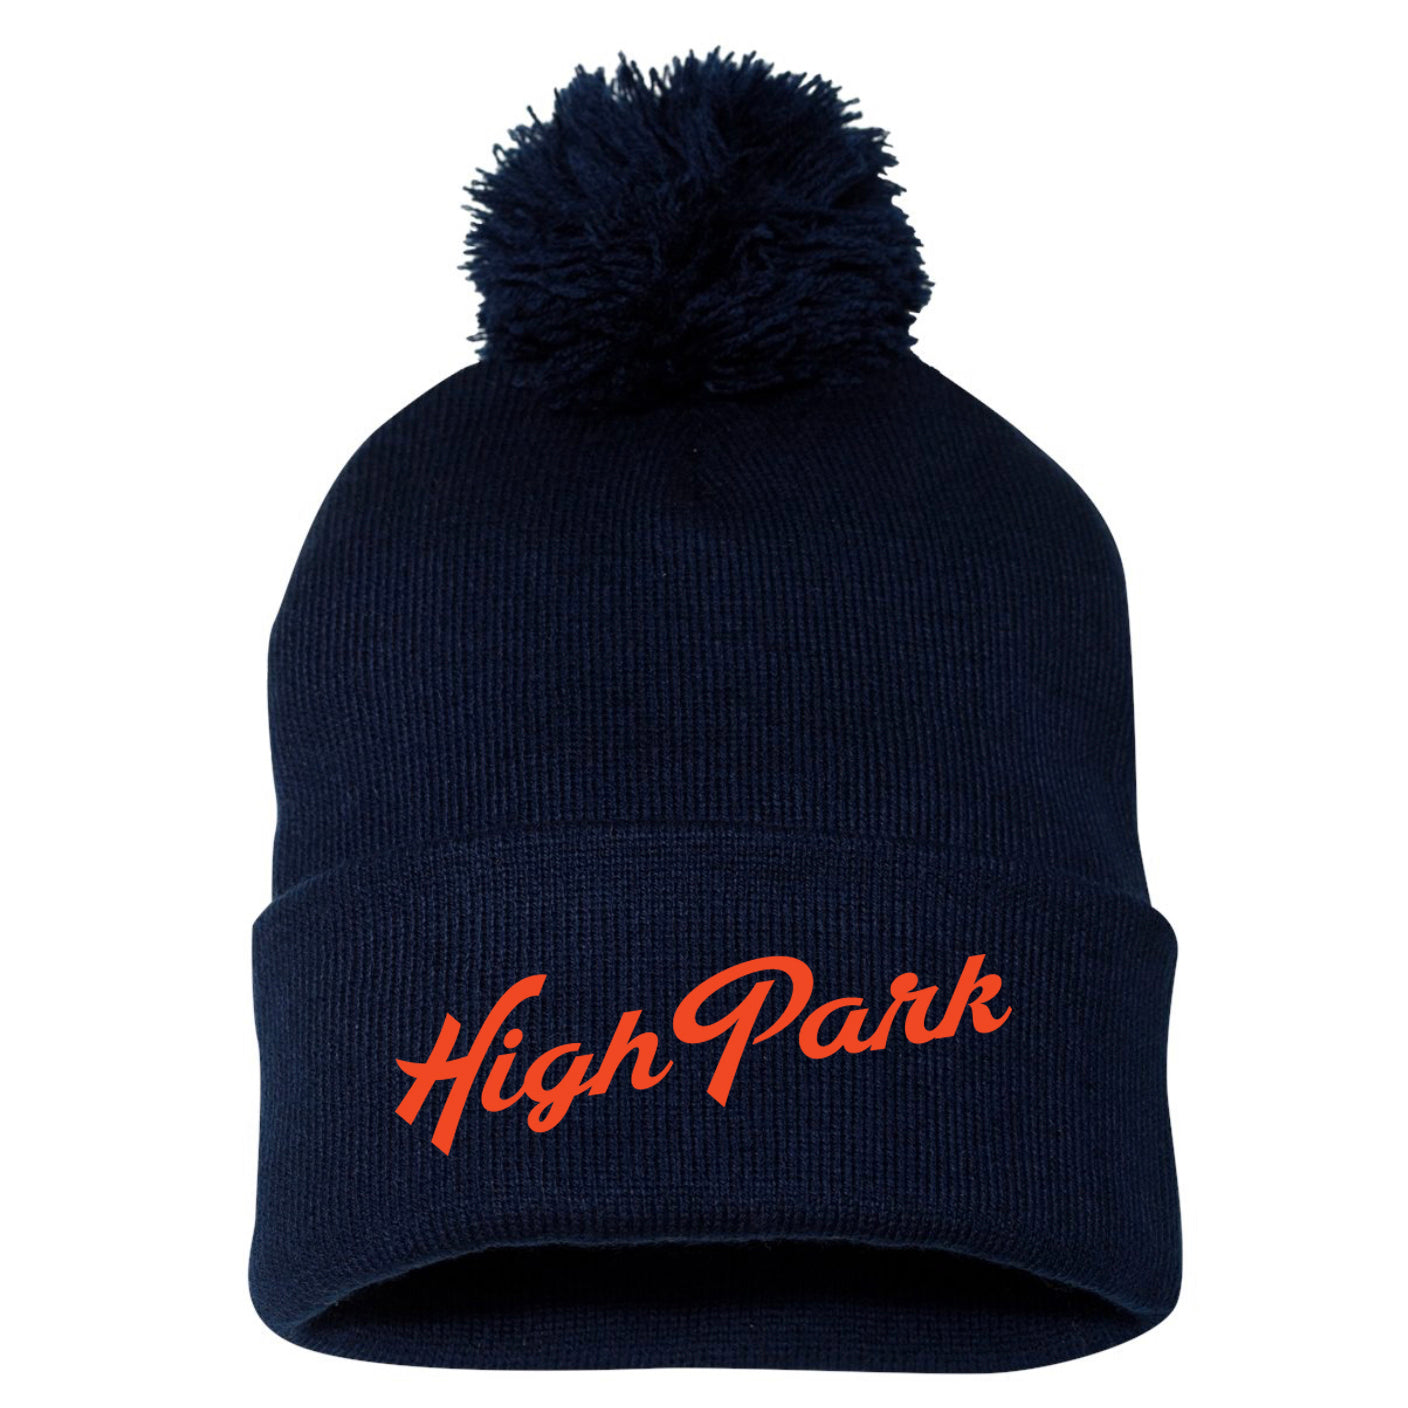 High Park Embroidered Hat